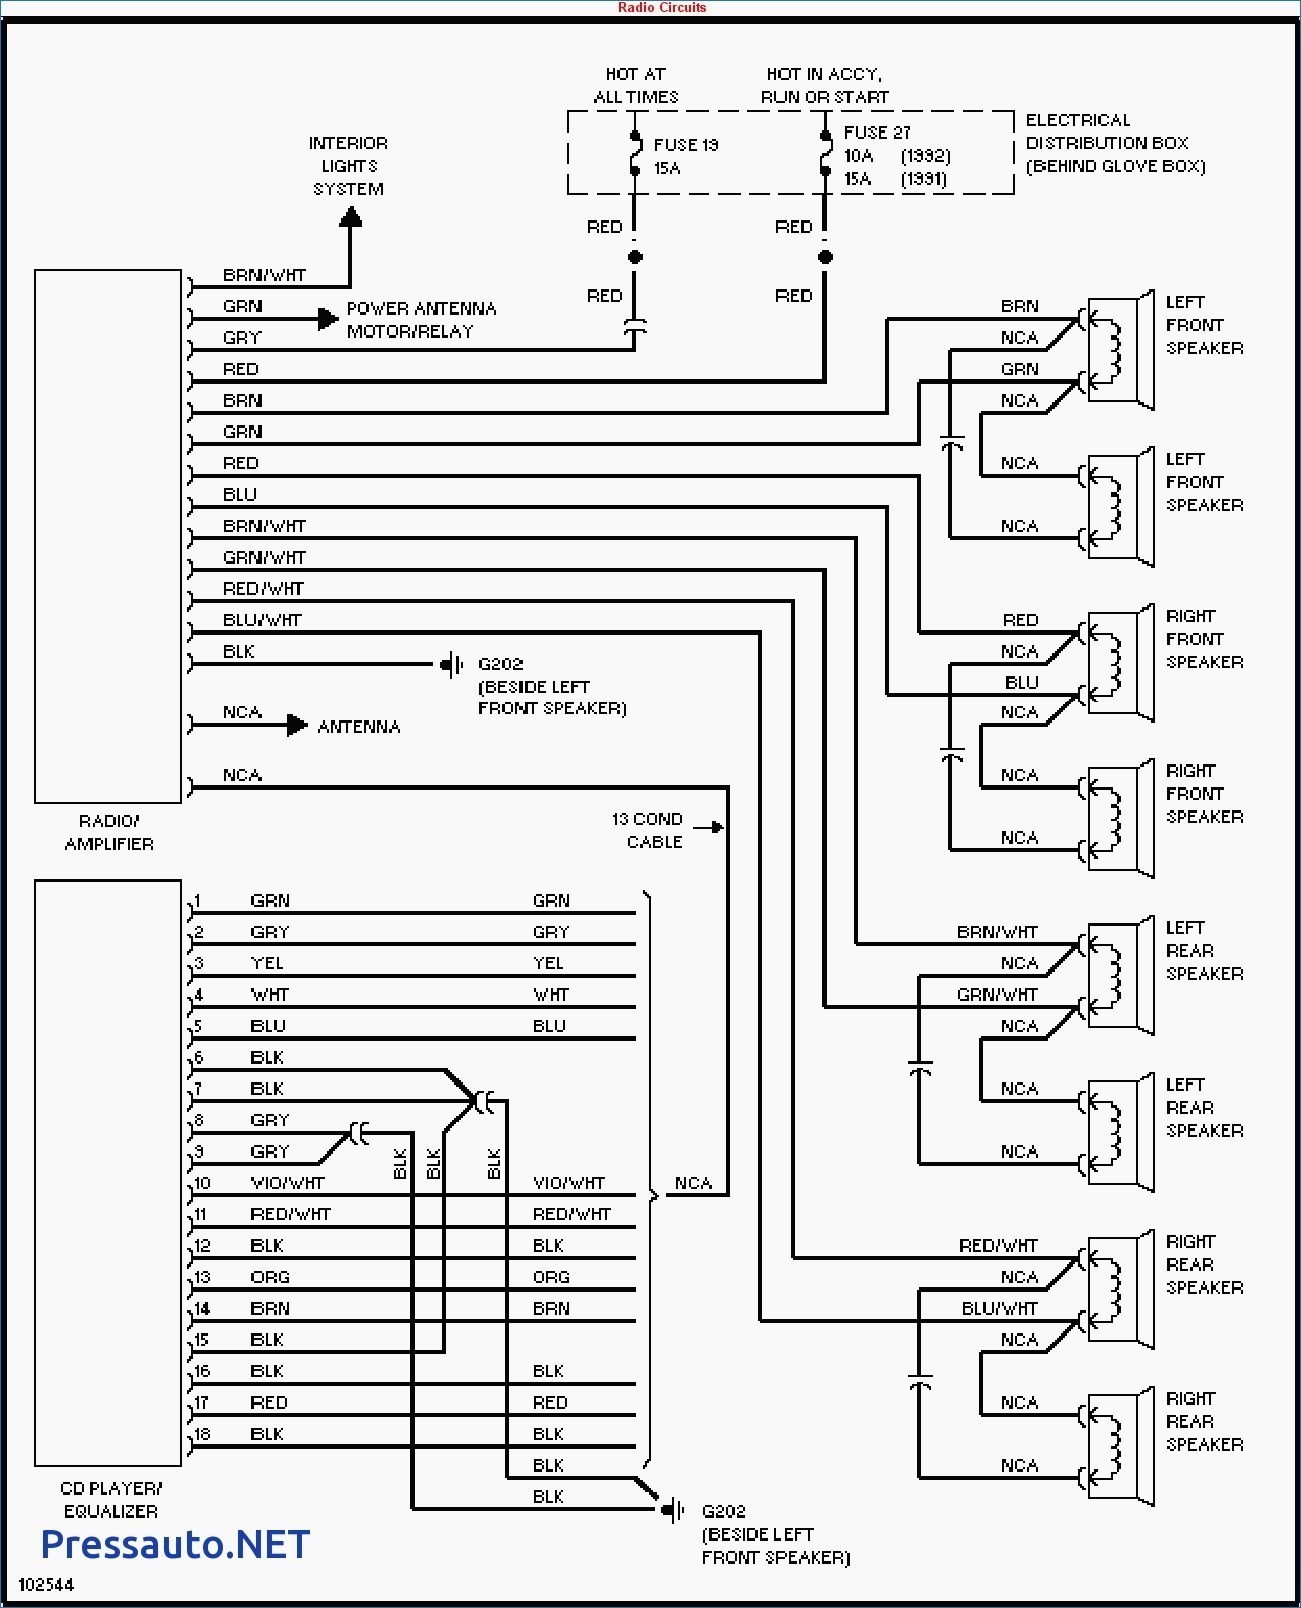 Wiring Diagram for A 1998 Jeep Cherokee Fresh New 1998 Jeep Grand Cherokee Radio Wiring Diagram